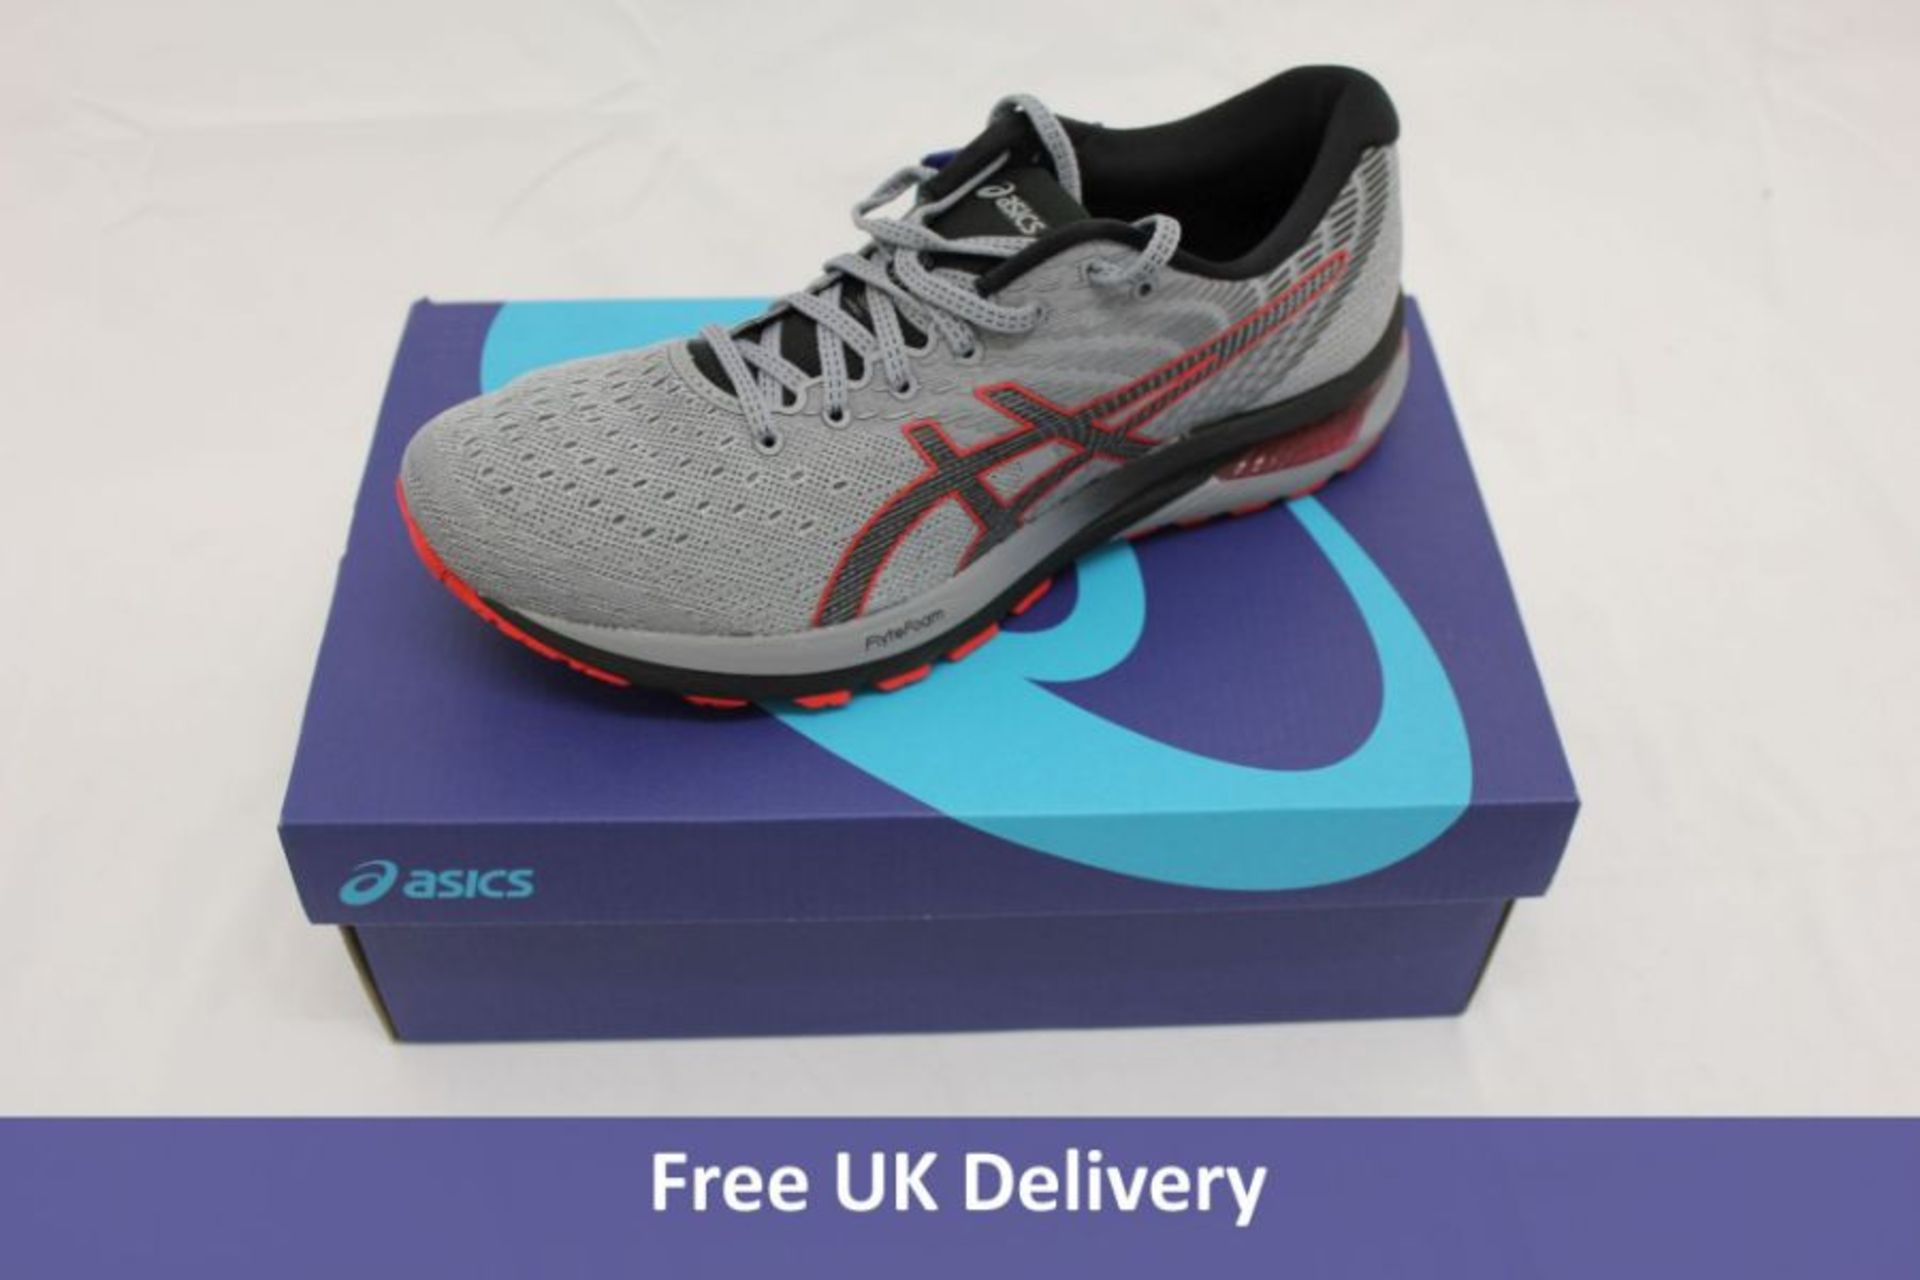 Two Asics Gel Cumulus 21 Men's Trainers to include 1x Electric Blue/White UK 10 and 1x Piedmont Grey